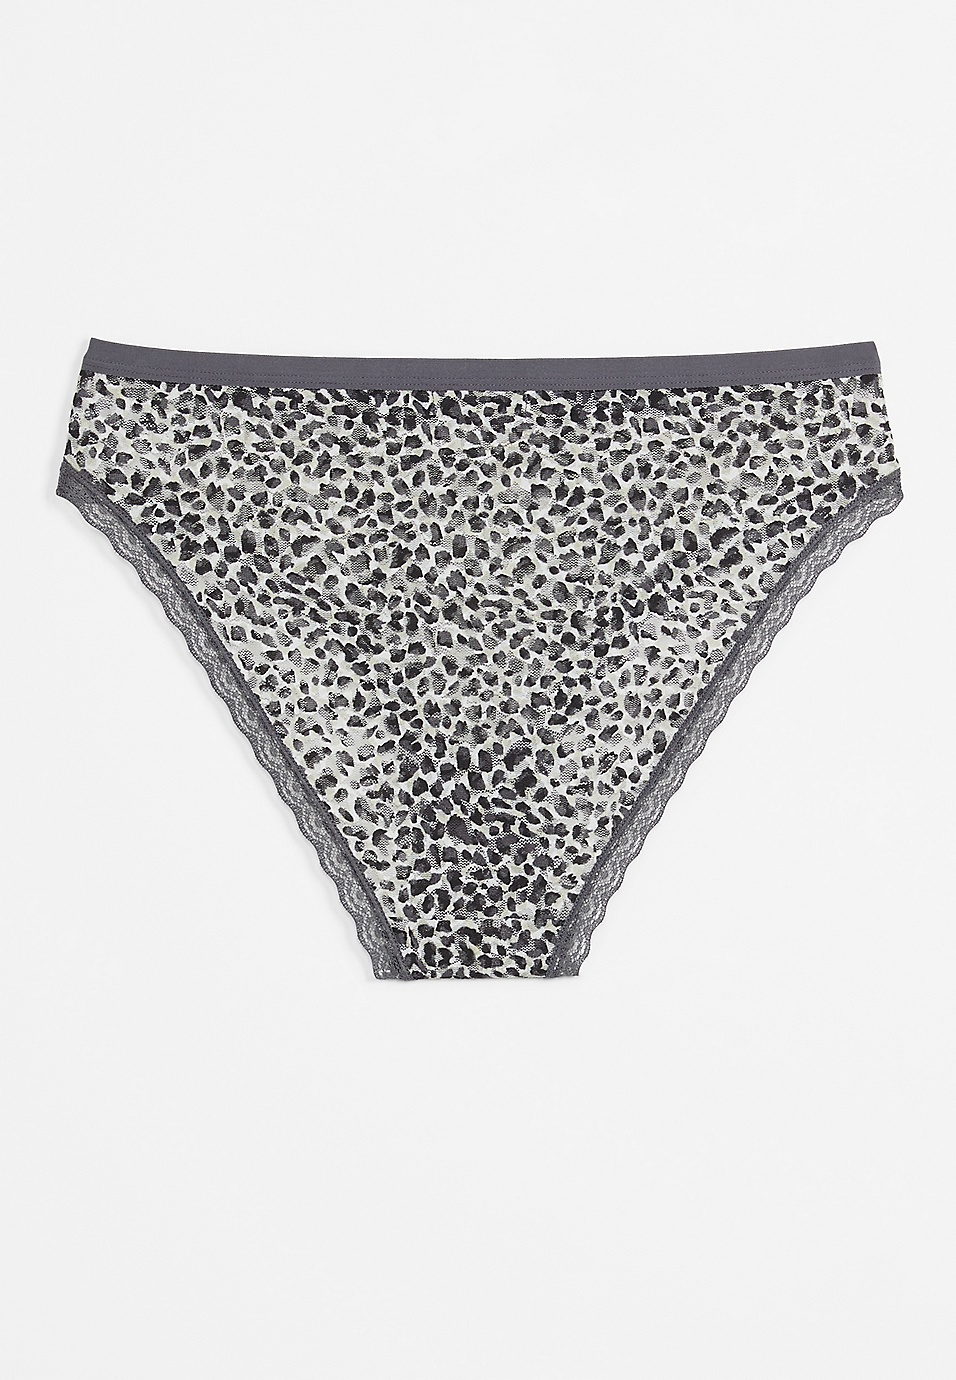 Buy Black Animal Print Lace Briefs for Women Online